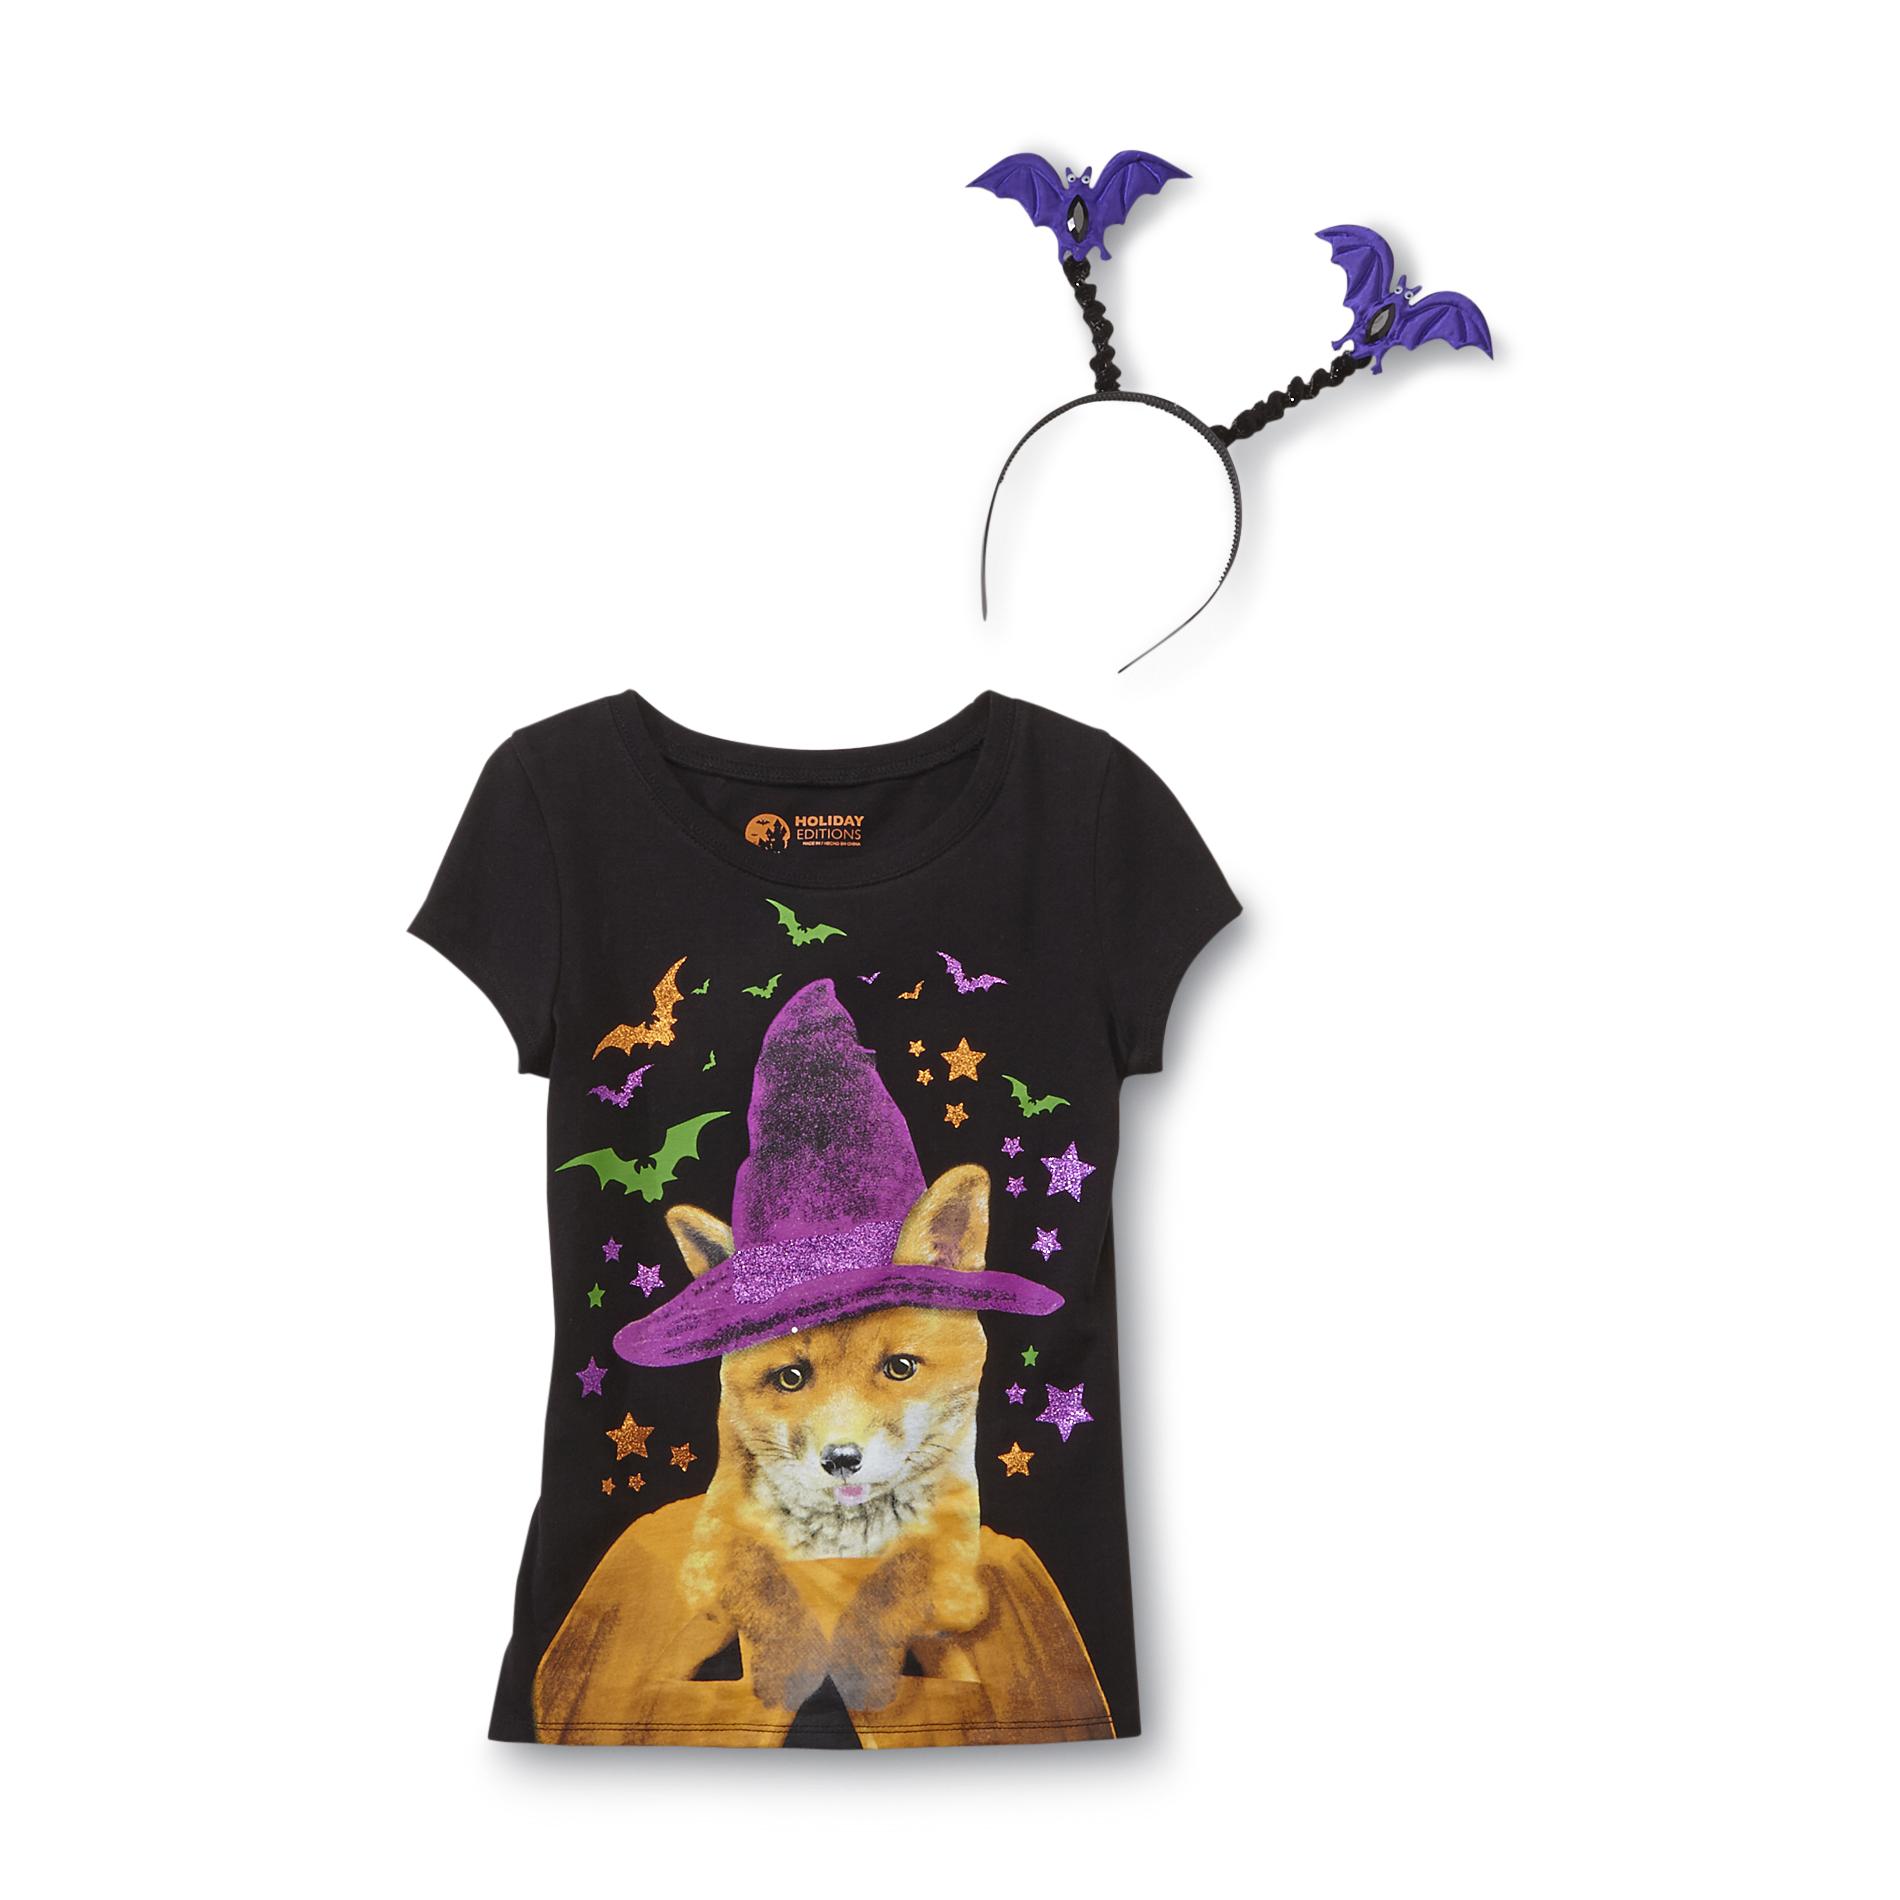 Holiday Editions Girl's Graphic T-Shirt & Bat Headband - Fox Witch